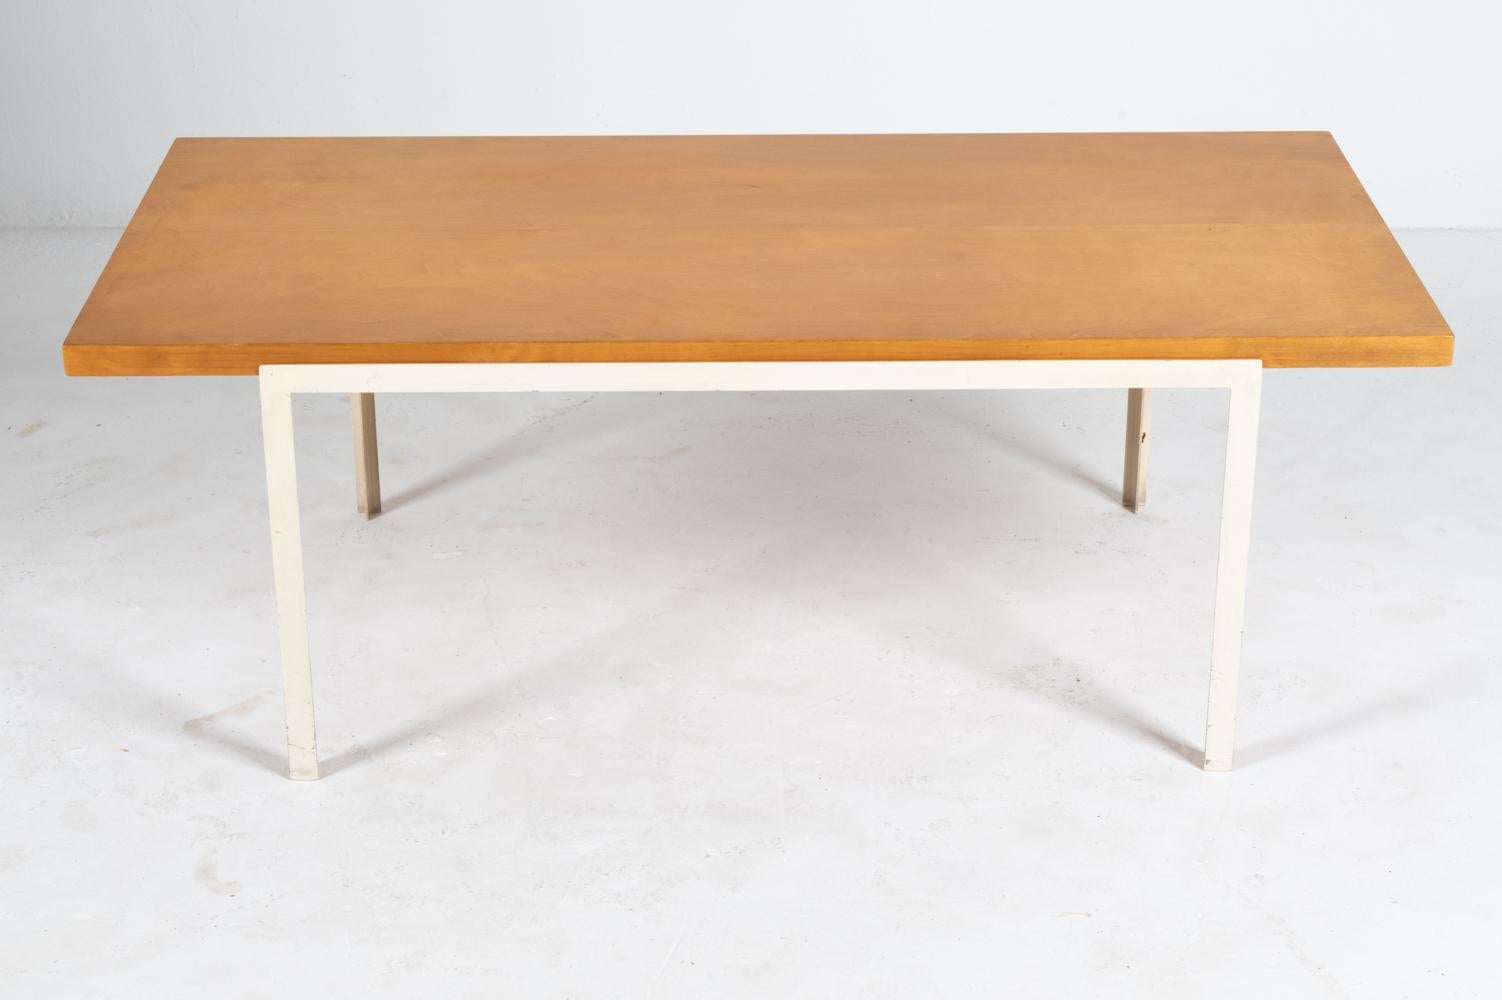 Rare Florence Knoll T-Angle Coffee Table in Birch; Knoll International c. 1960's For Sale 2